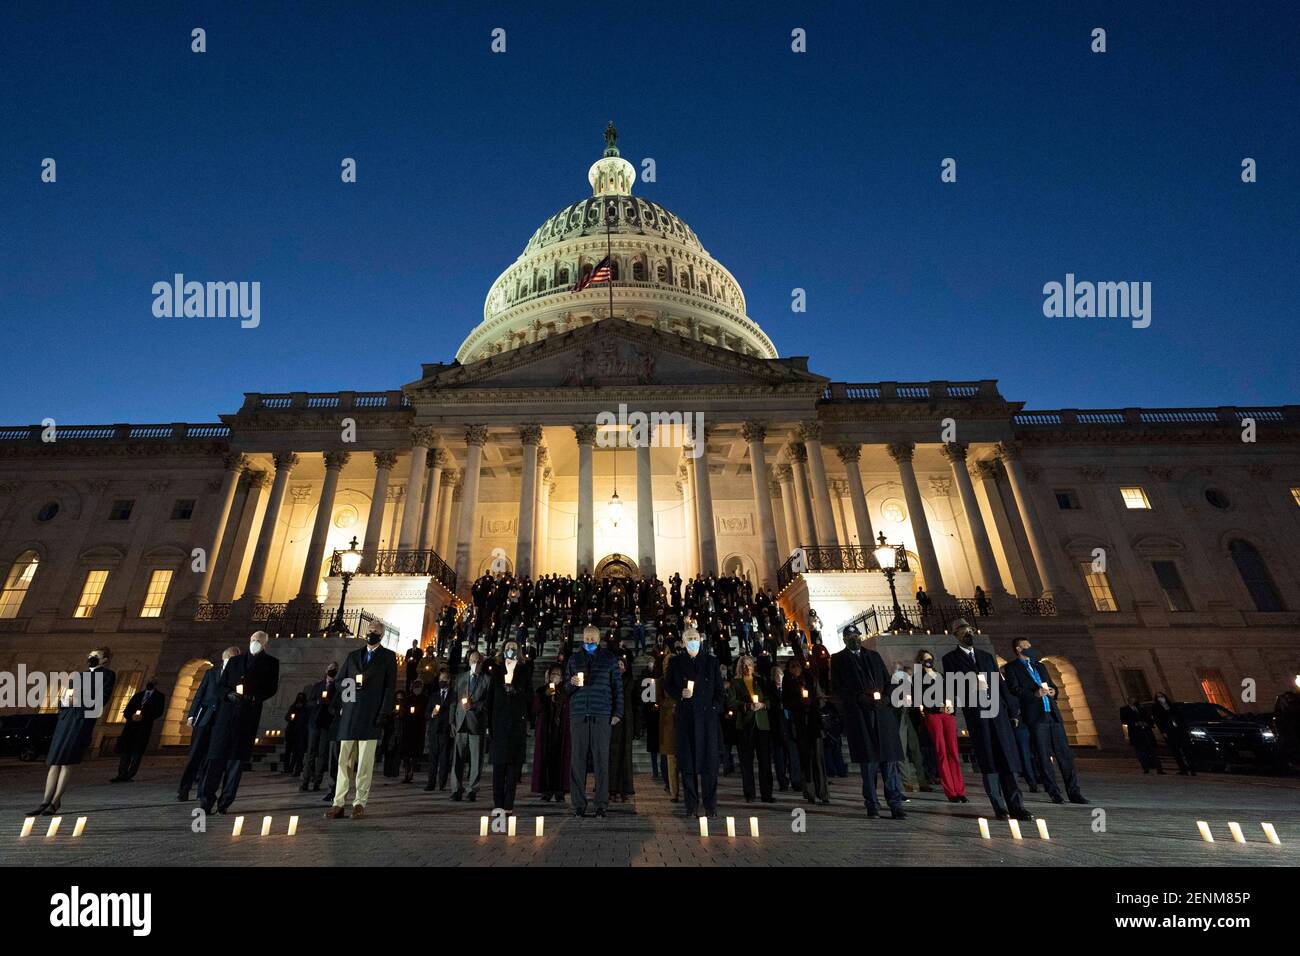 Members of Congress led by Senate Majority Leader Chuck Schumer and Minority Leader Mitch McConnell hold a candlelight vigil and moment of silence for the over 500,000 Americans who have died from COVID-19 outside the U.S. Capitol February 23, 2021 in Washington, D.C. Stock Photo